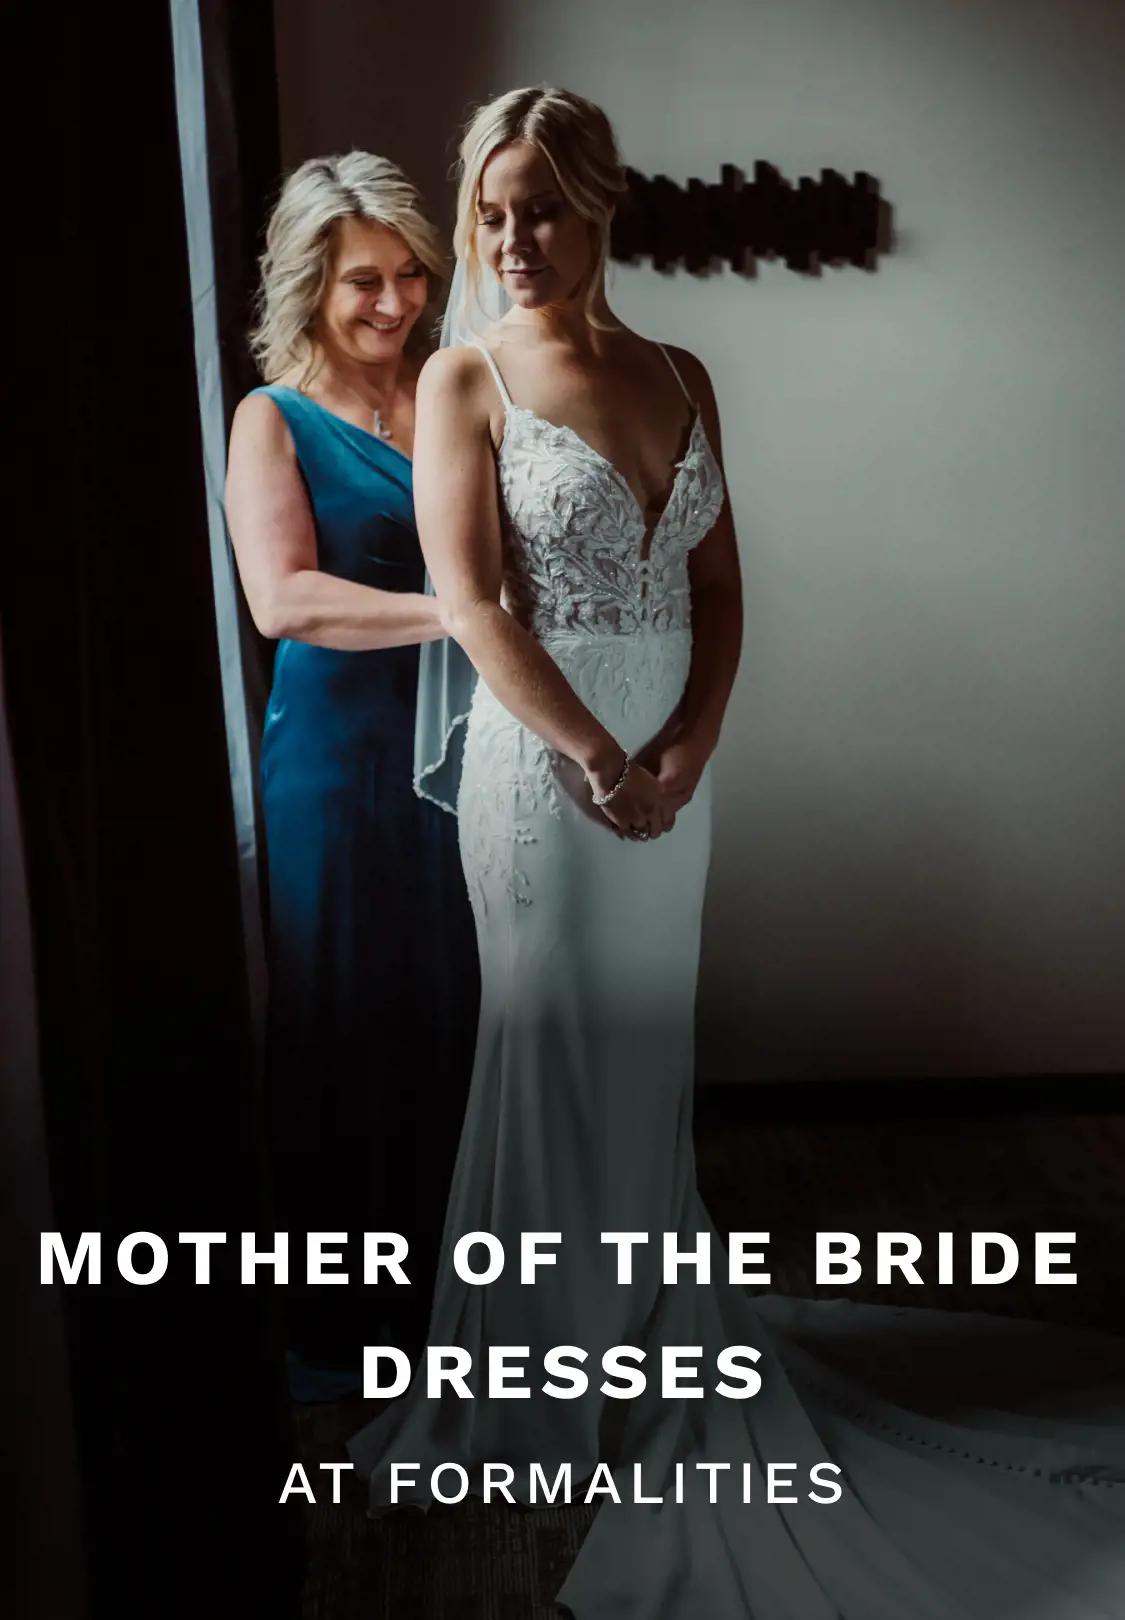 Mother of the bride designers. Mobile image